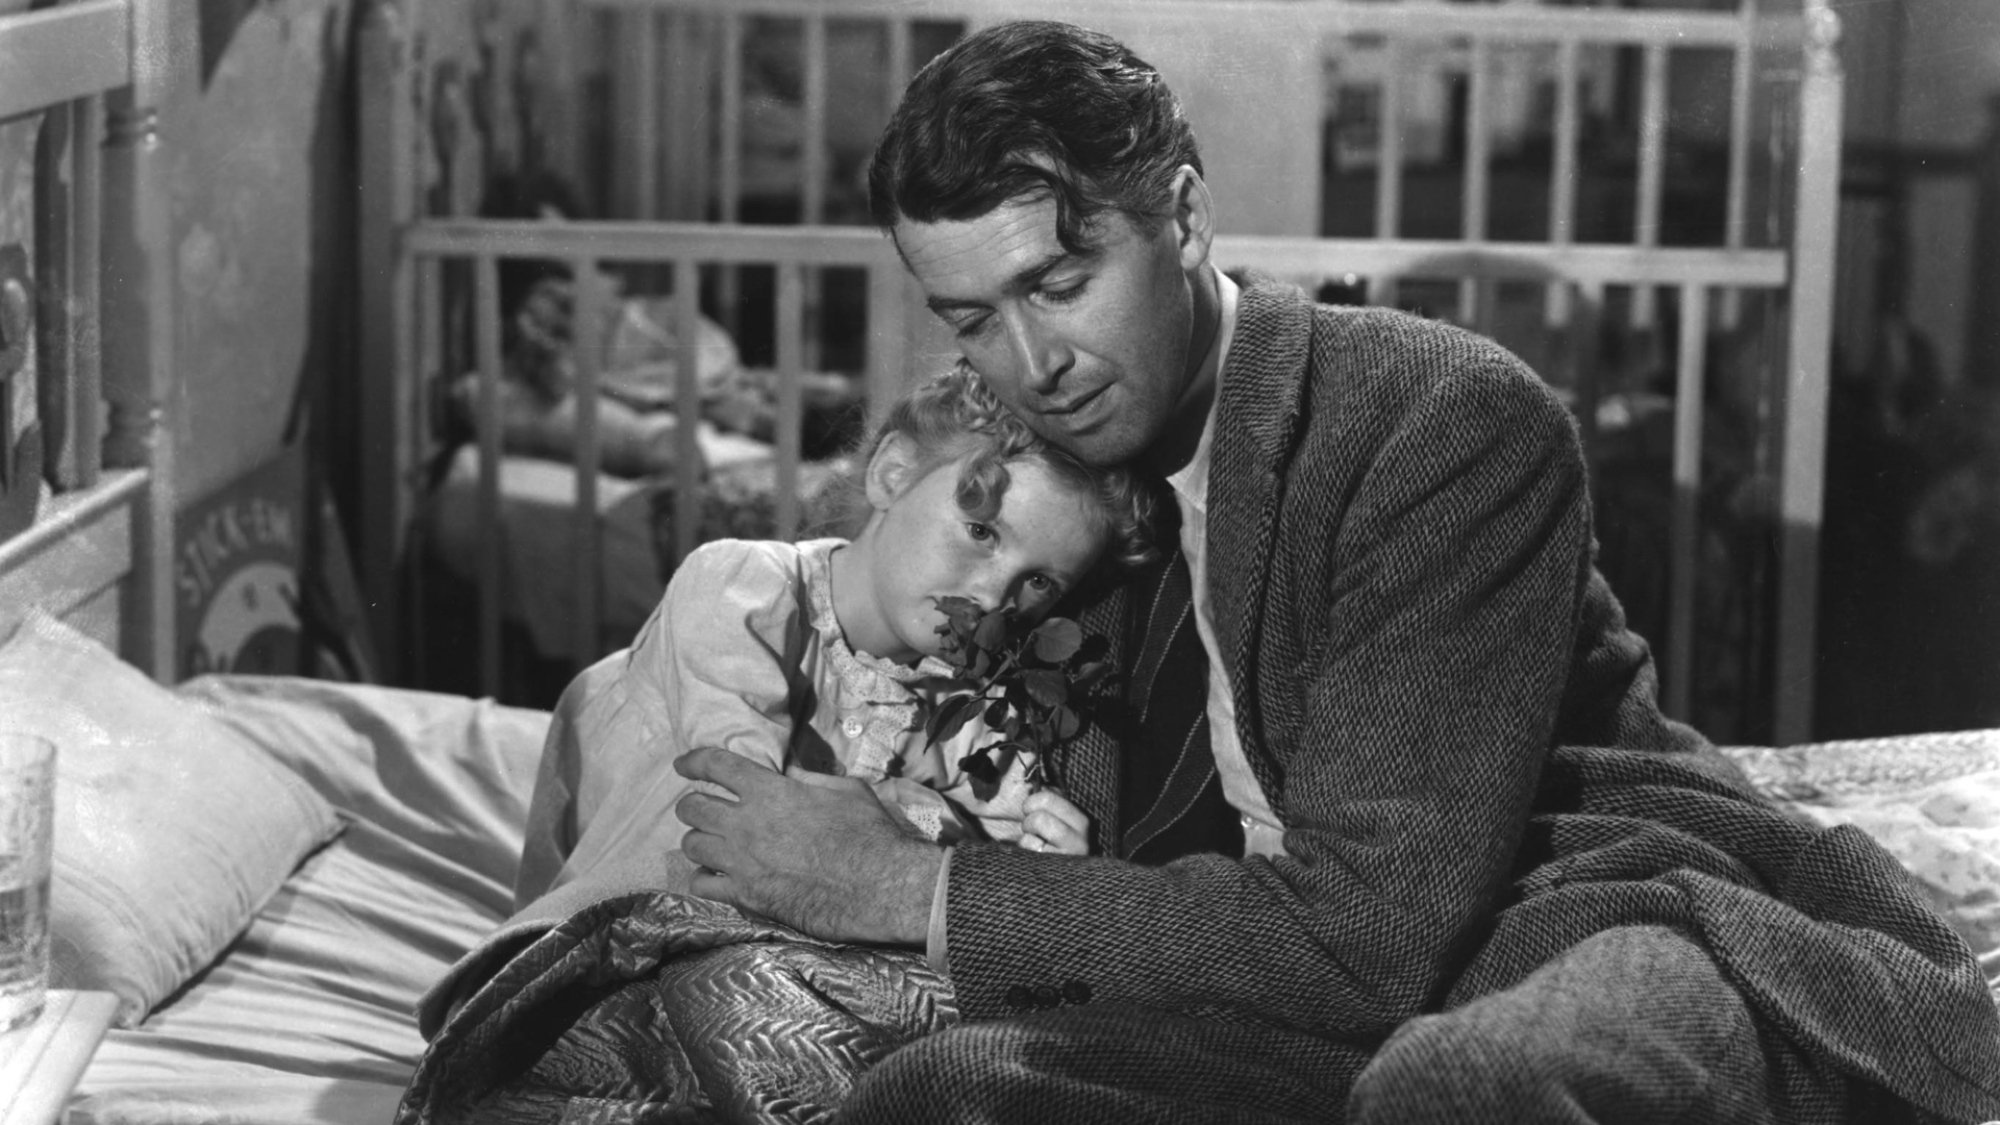 Karolyn Grimes and James Stewart in "It's a Wonderful Life"